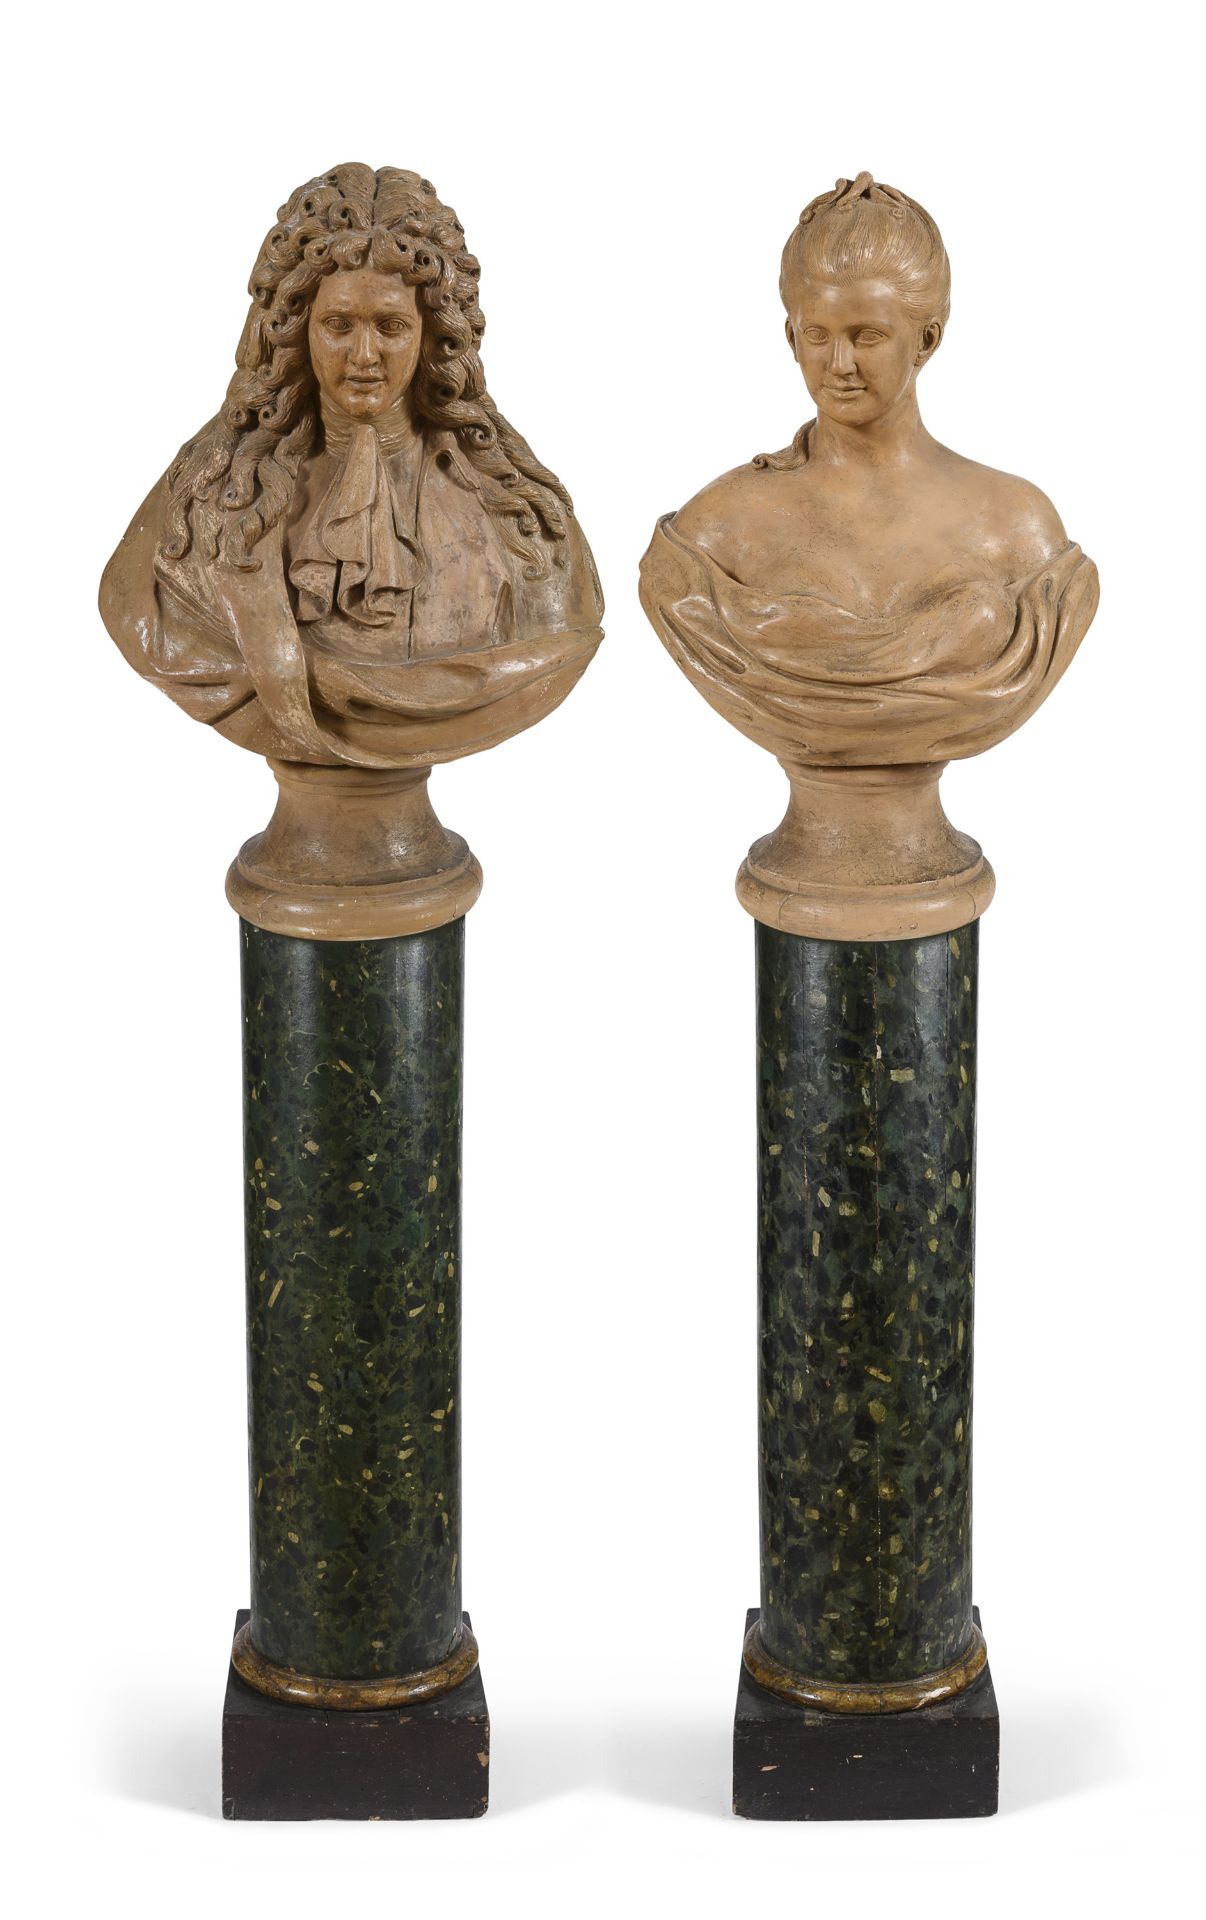 PAIR OF TERRACOTTA BUSTS WITH COLUMNS END OF THE 18TH CENTURY